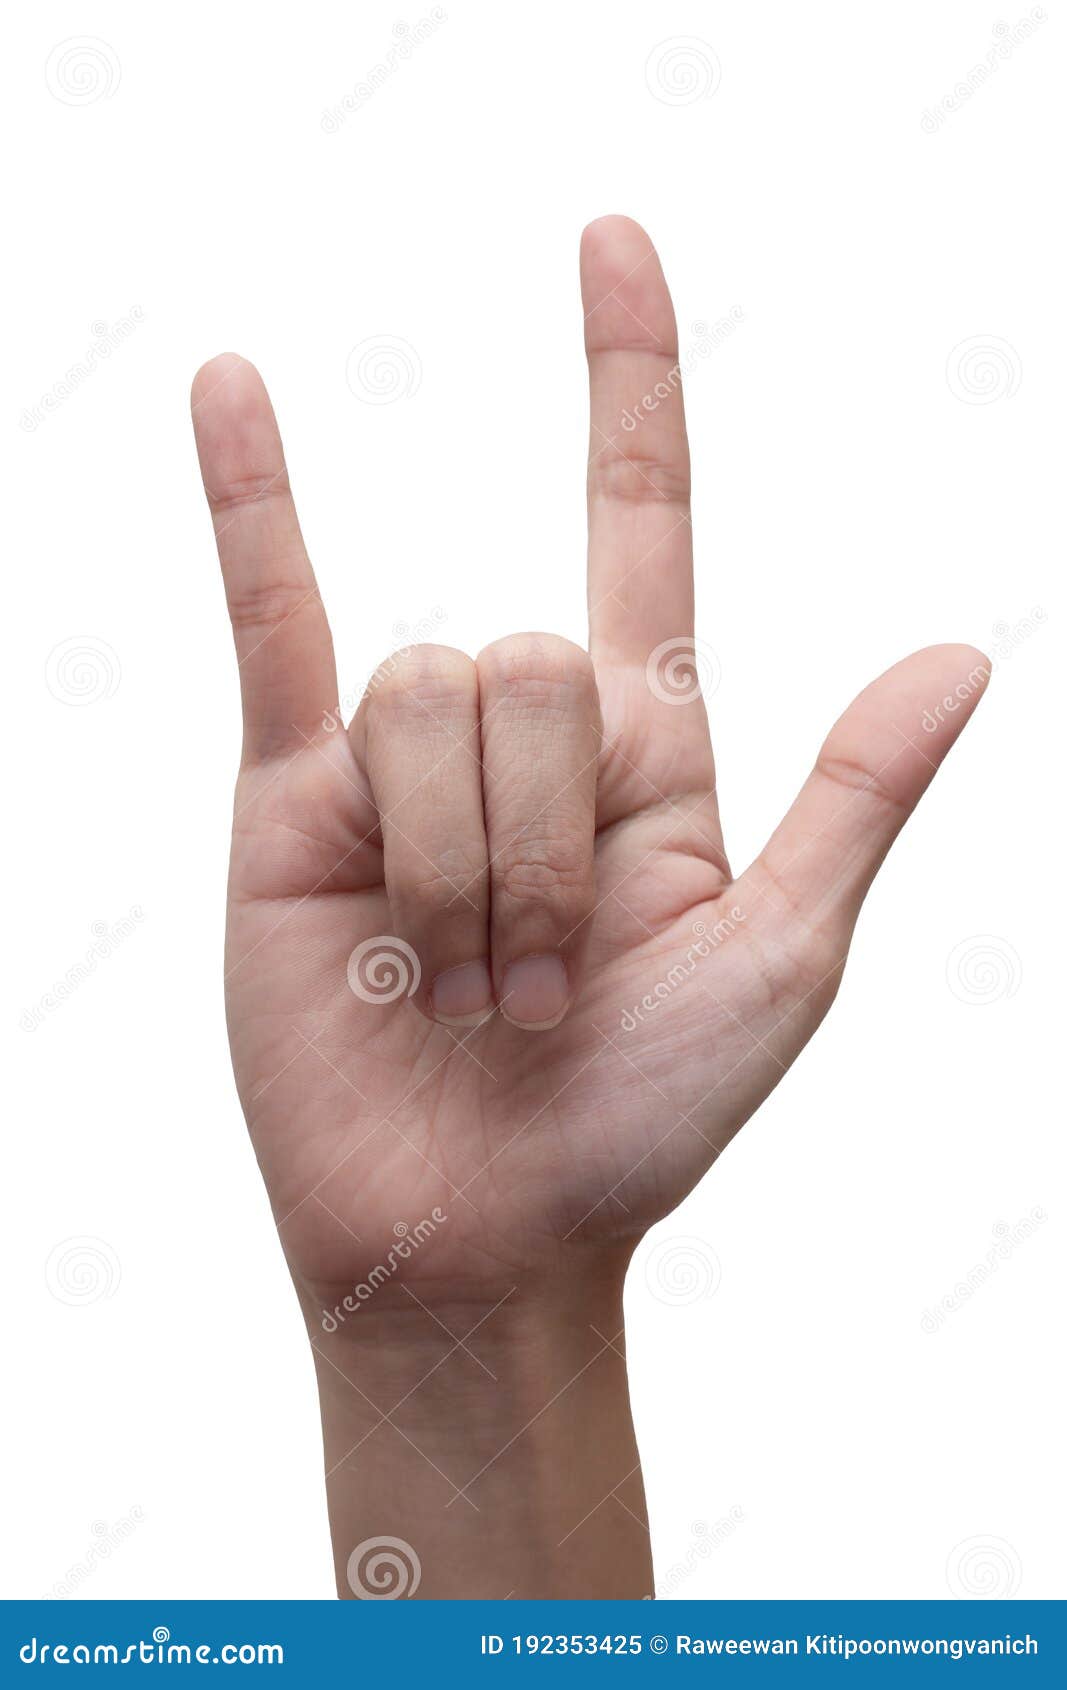 I love you in sign language